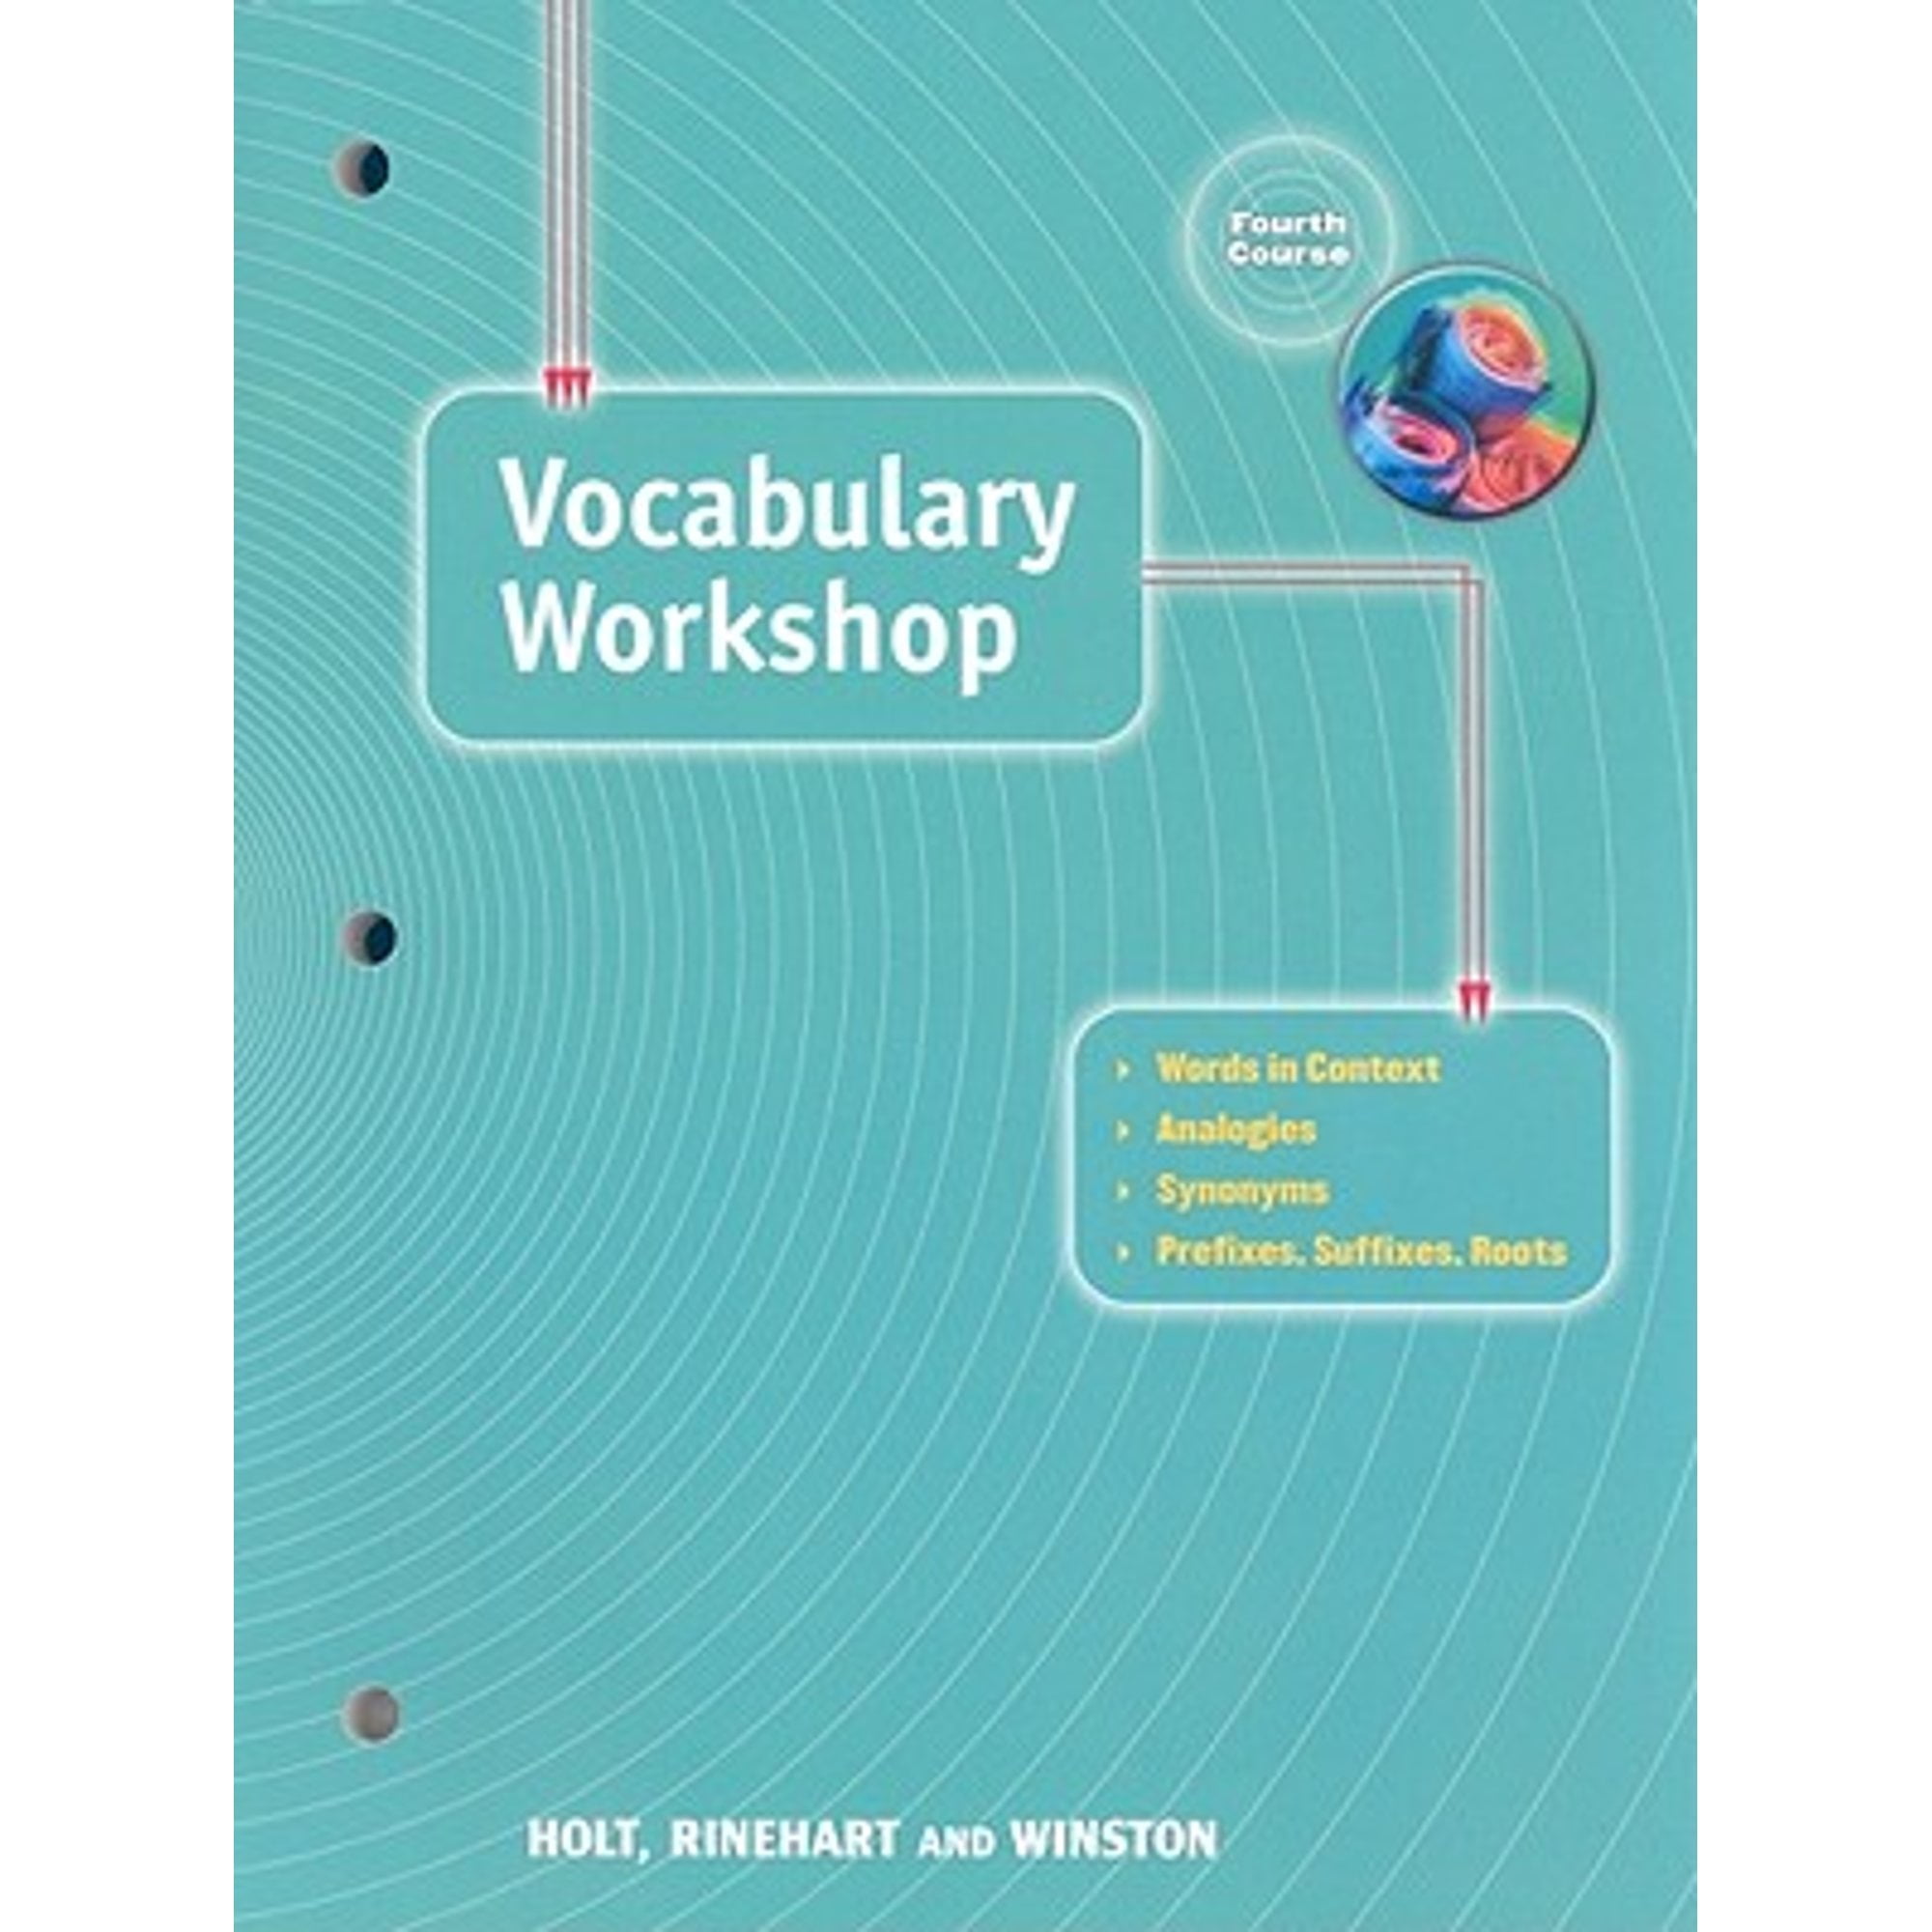 Holt　(Prepared　Rinehart　Vocabulary　Course　Pre-Owned　of　(Paperback　Grade　Fourth　Workshop　Winston　by　Elements　by)　for　10　Language:　and　9780030560293)　publication